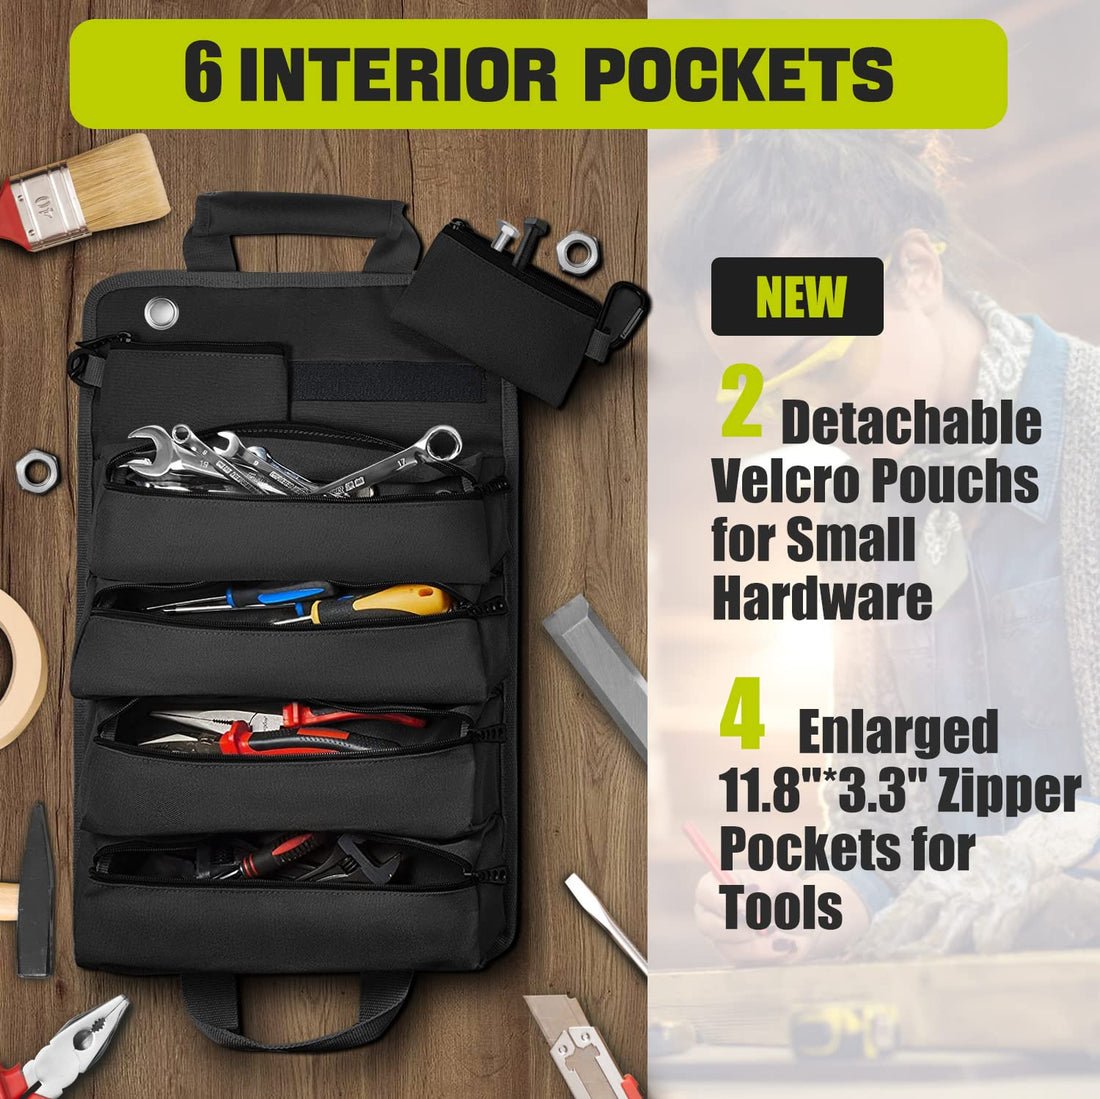 Upgraded Tool Roll Up Bag, SYCYKA Heavy Duty Roll Up Tool Bag, Roll Up Tool Organizer with 2 Detachable Shoulder Strap, Multi-Purpose Tool Roll Pouch for Motorcycle Truck Electrician